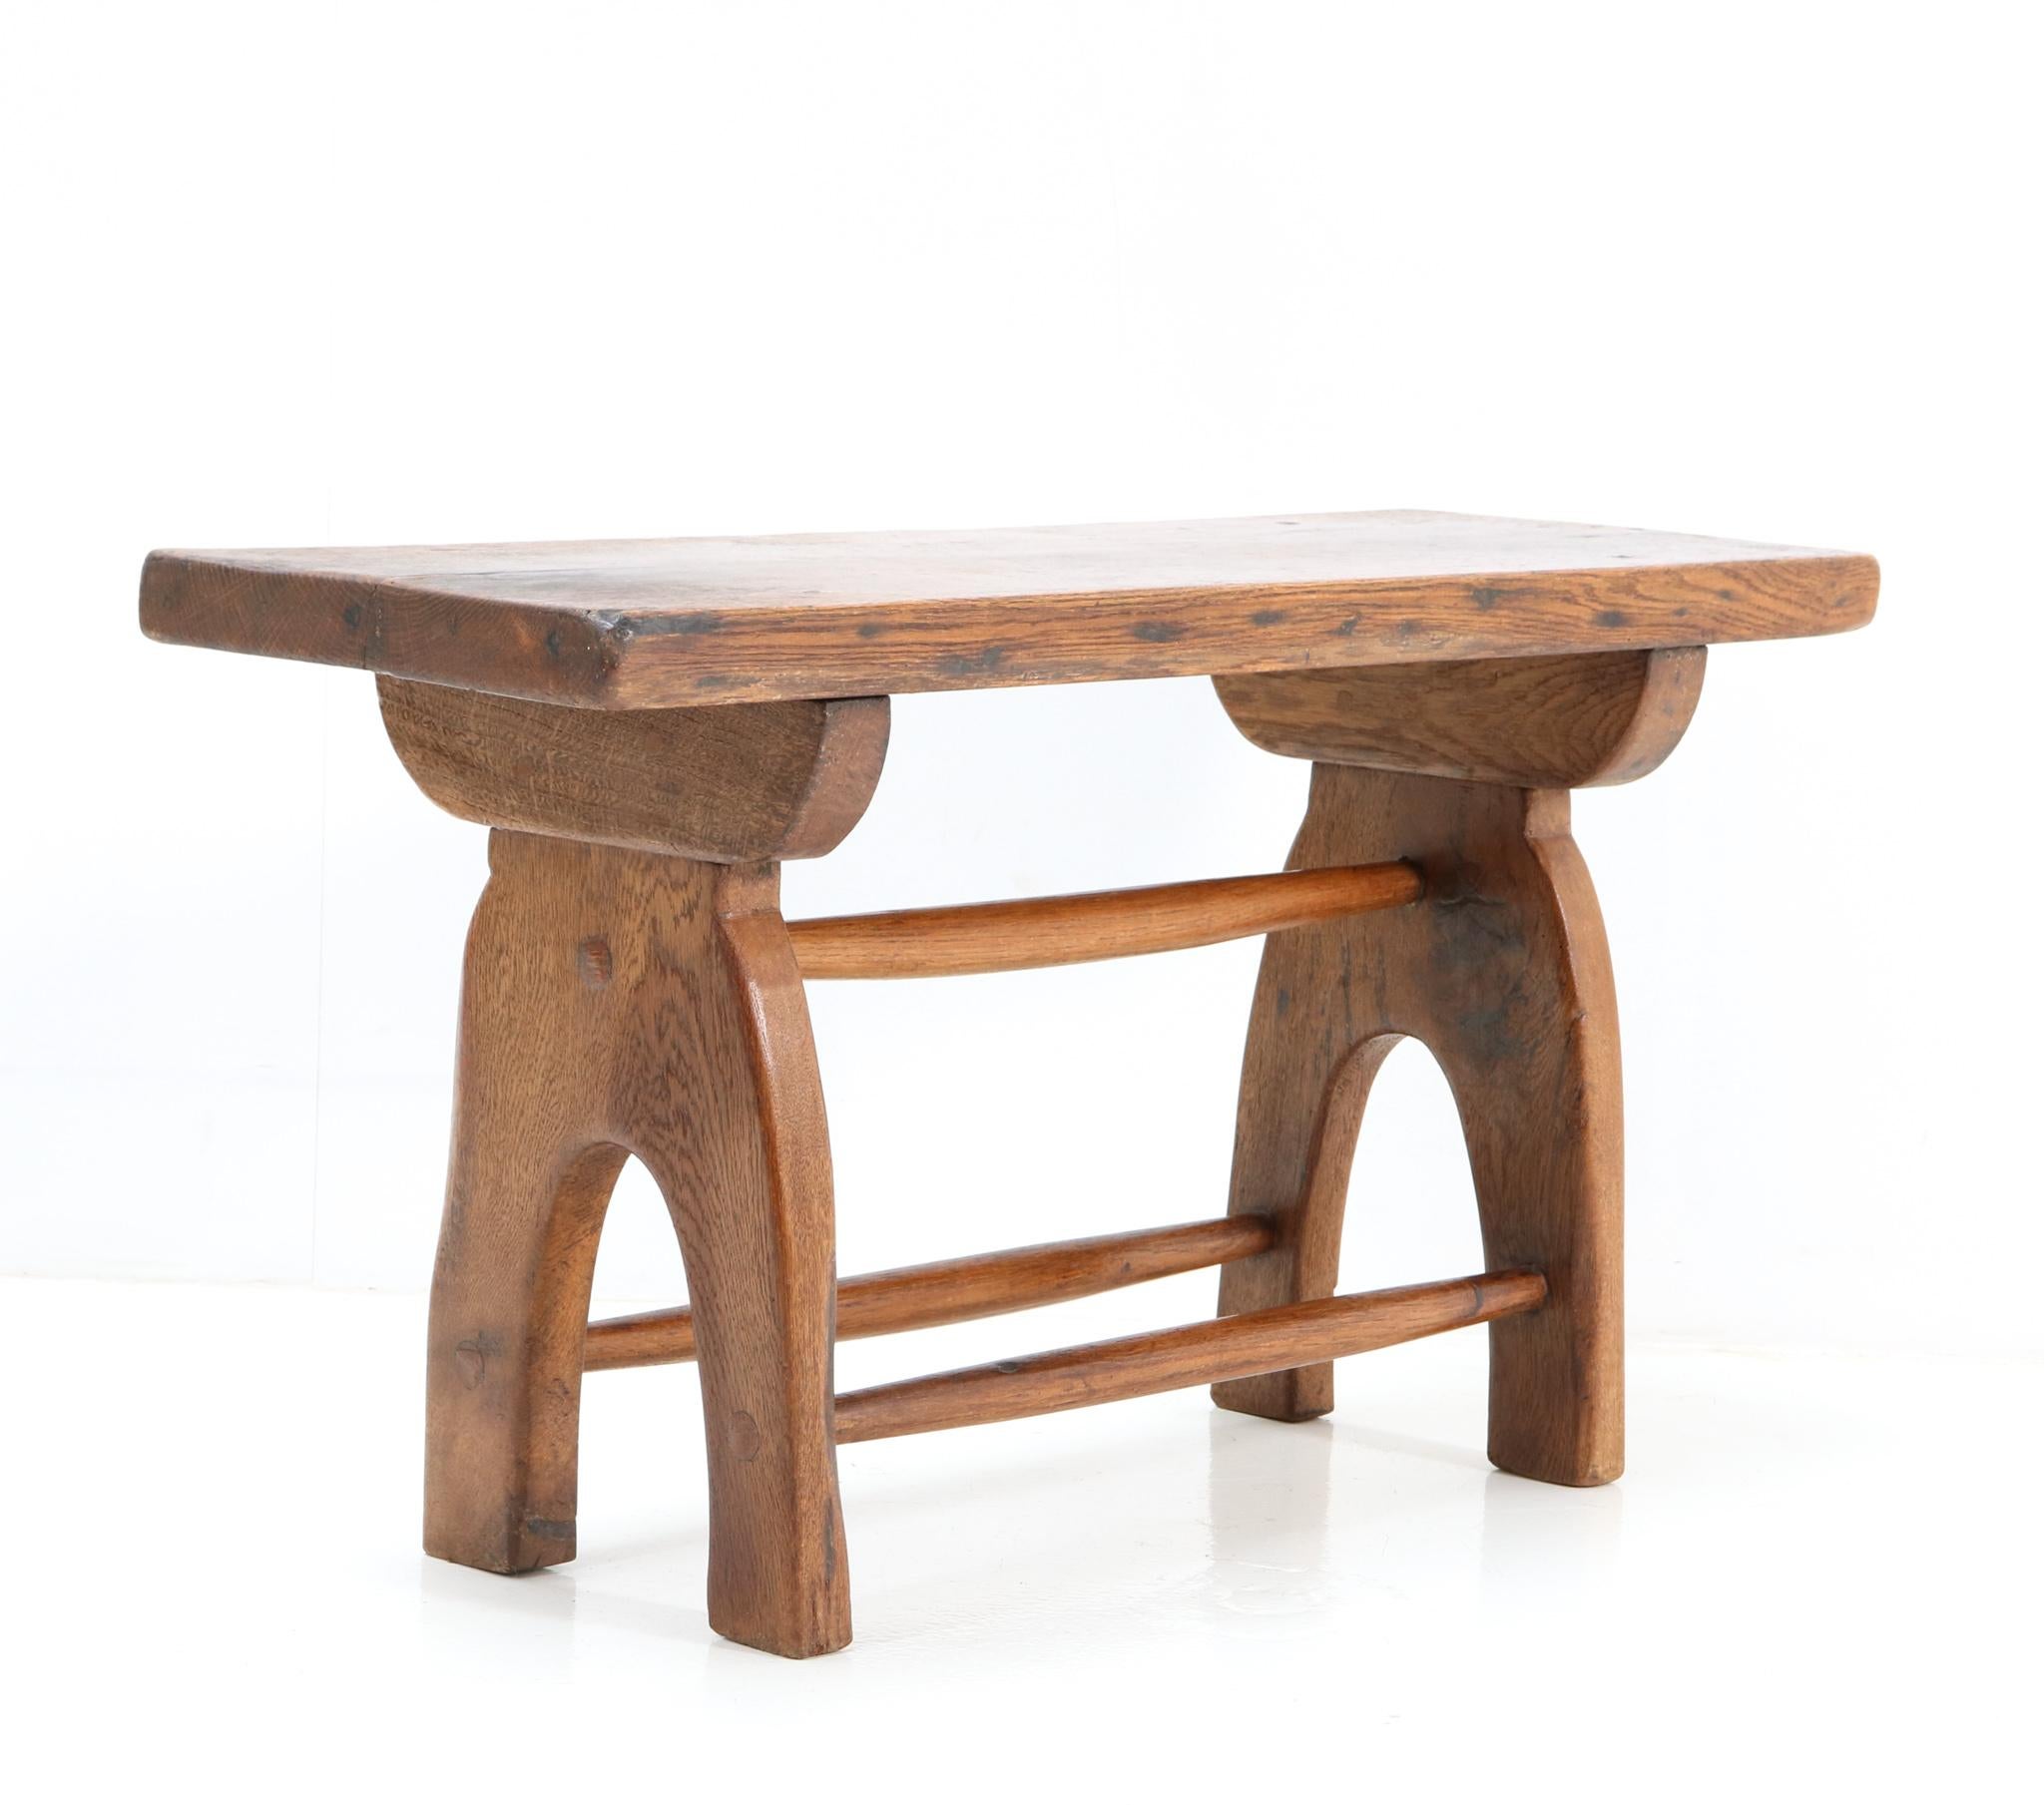 Late 19th Century Primitive Hand-Made Rustic European Oak Countryside Bench or Side Table, 1890s